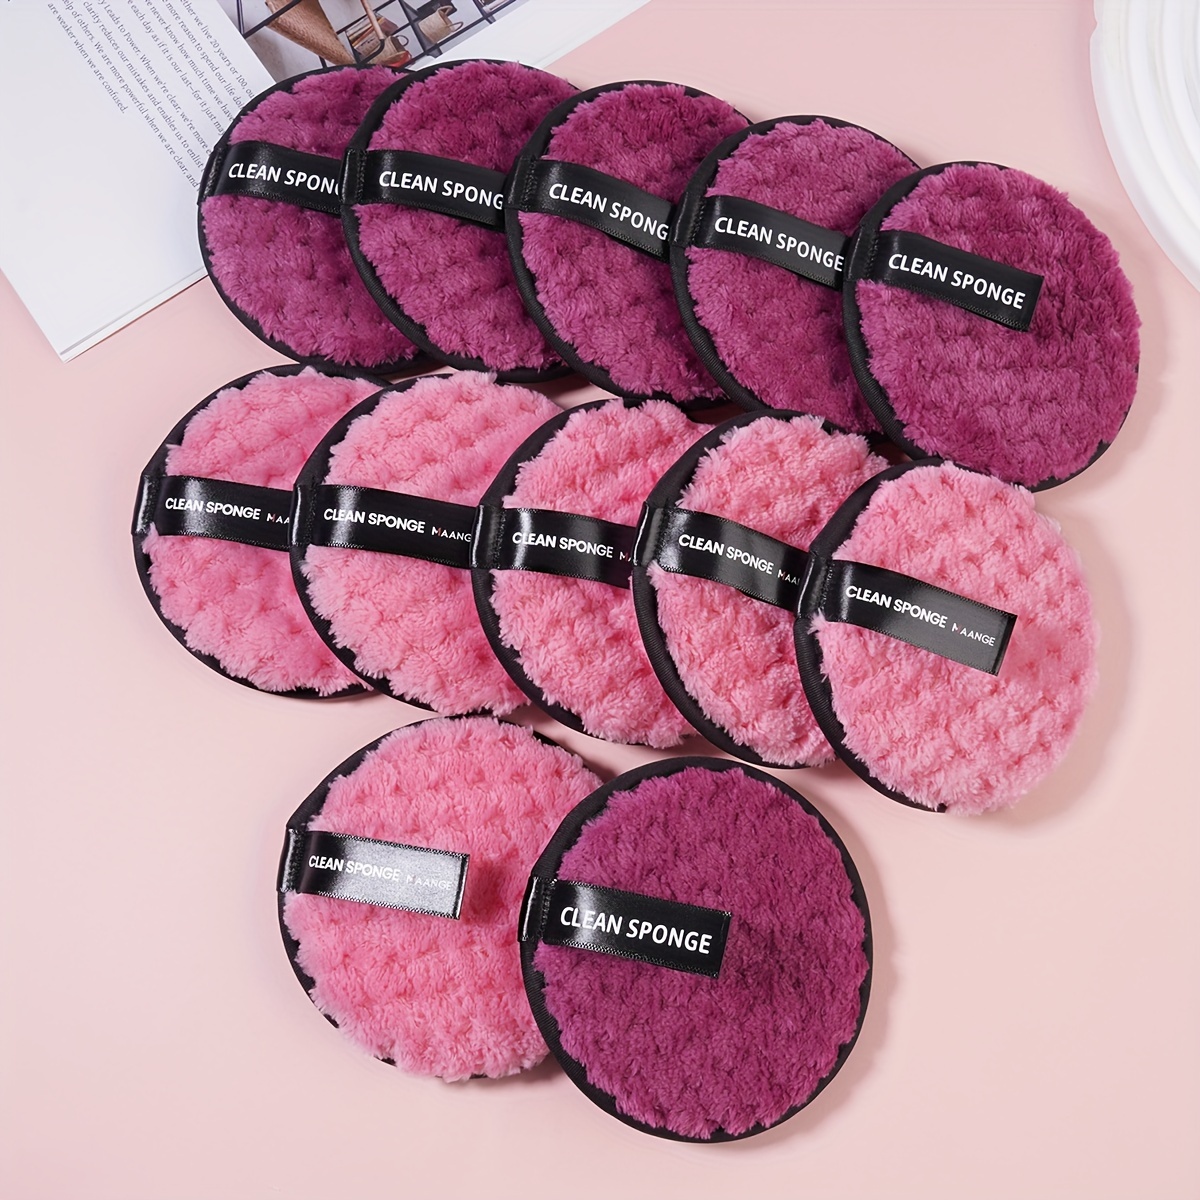 

12pcs Makeup Remover Pads Fash Wash Puff Facial Cleansing Sponges For Cosmetics Removing Reusable Washable Kit Gentle Beauty Care Tool Suitable For Light/medium/heavy Makeup Removing